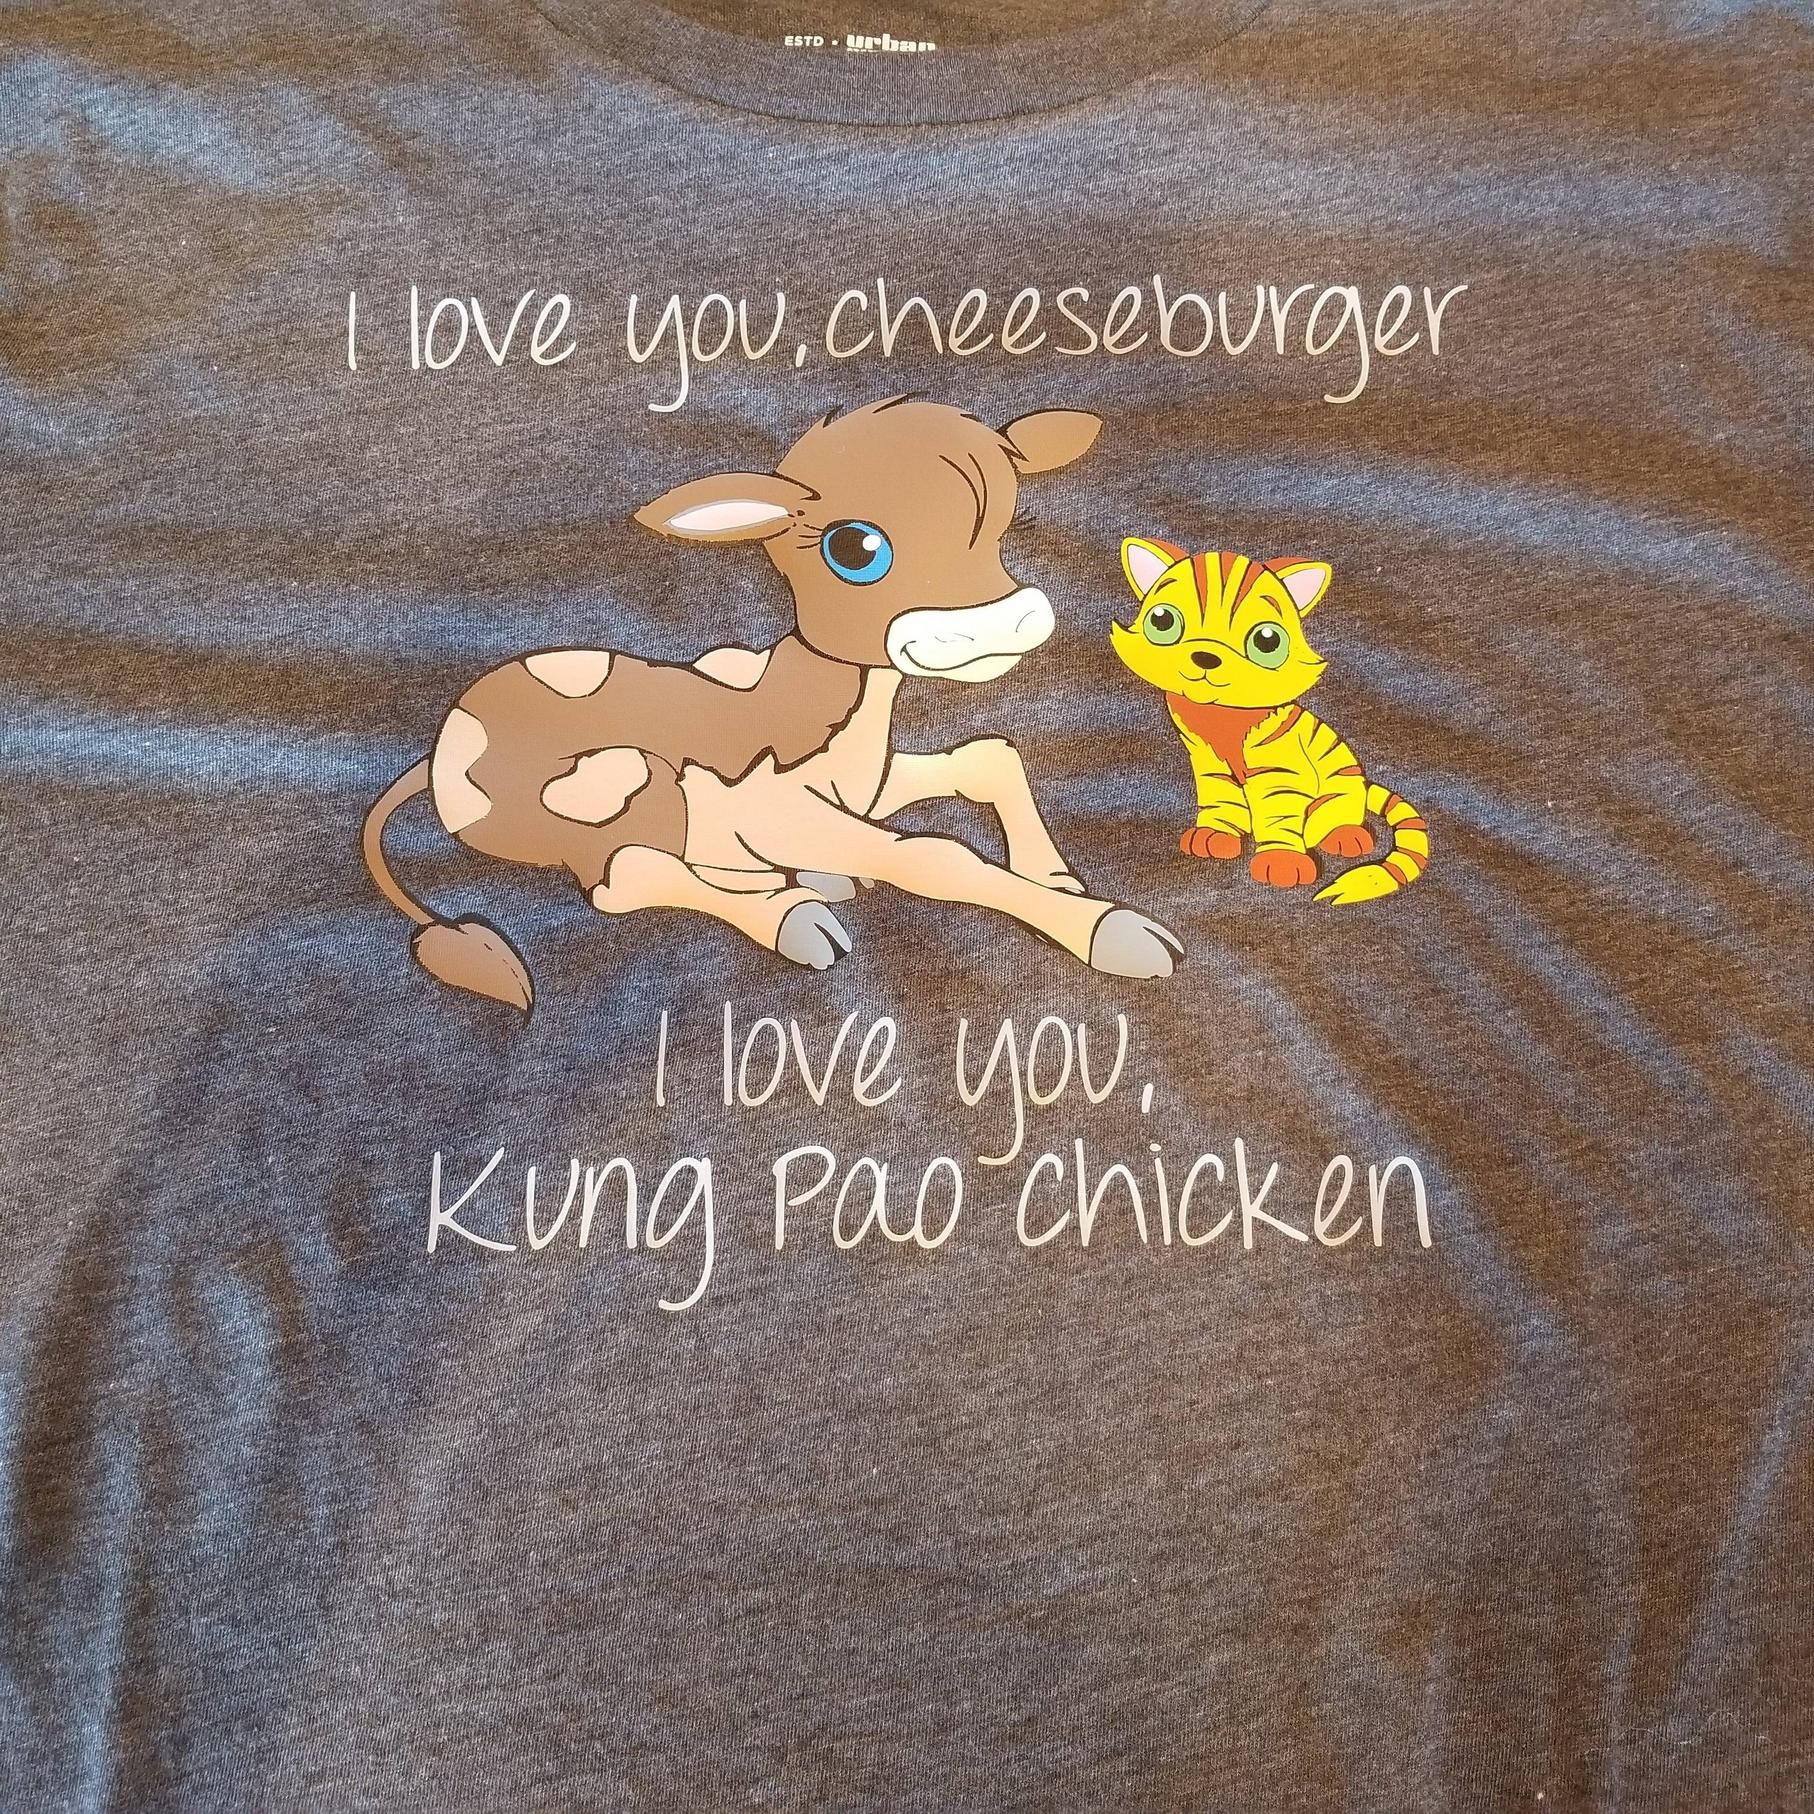 After seeing this meme on here I had my gf make it into a shirt